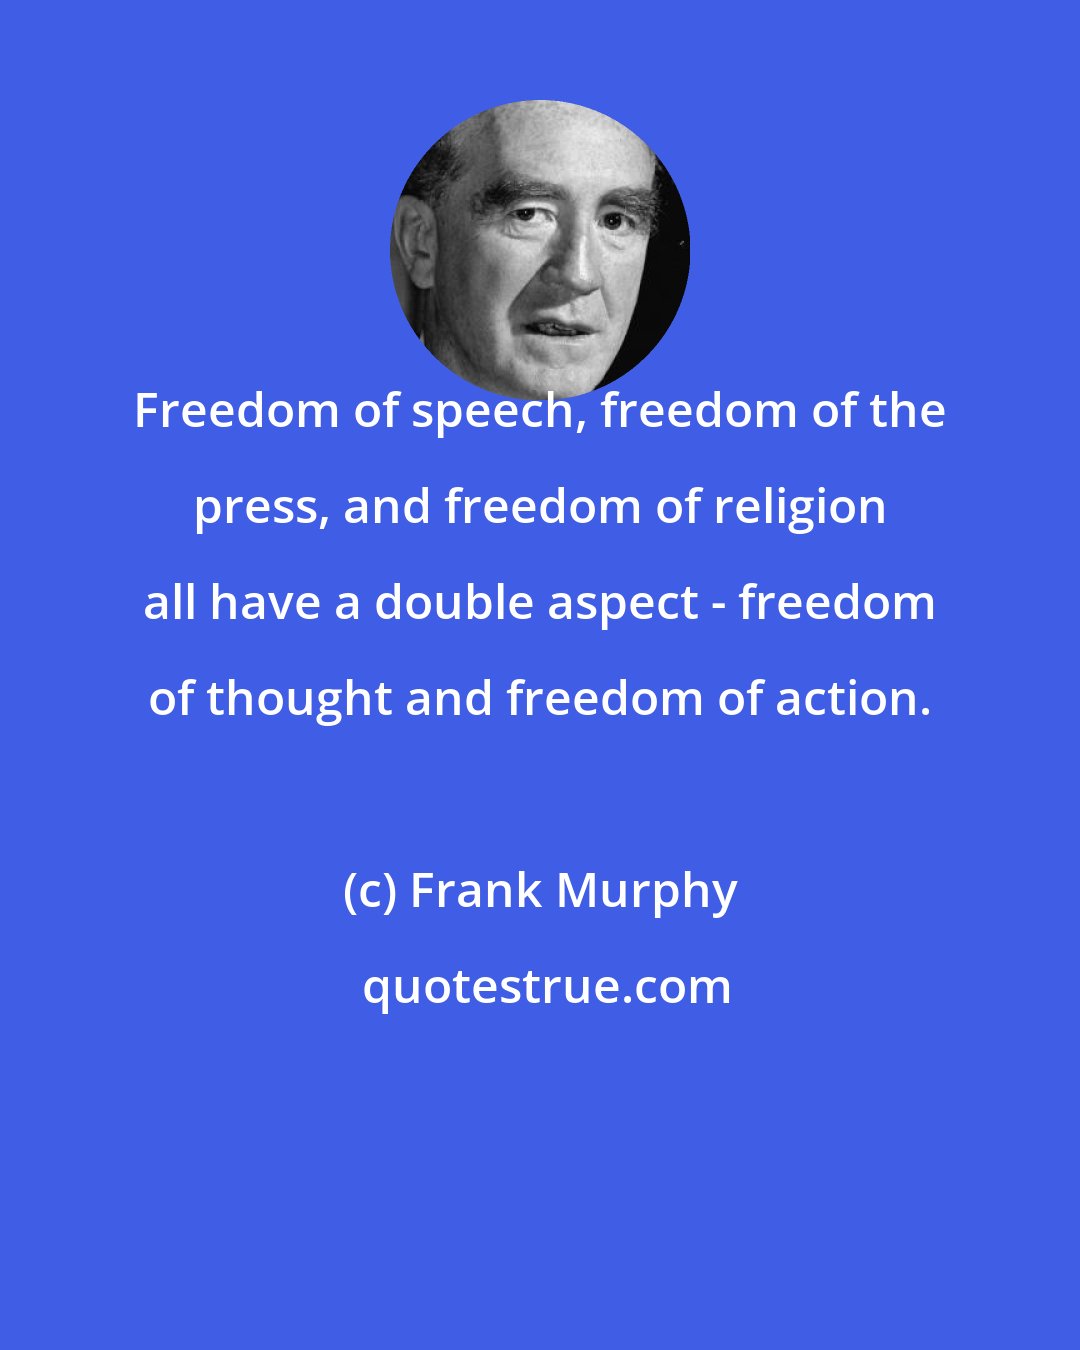 Frank Murphy: Freedom of speech, freedom of the press, and freedom of religion all have a double aspect - freedom of thought and freedom of action.